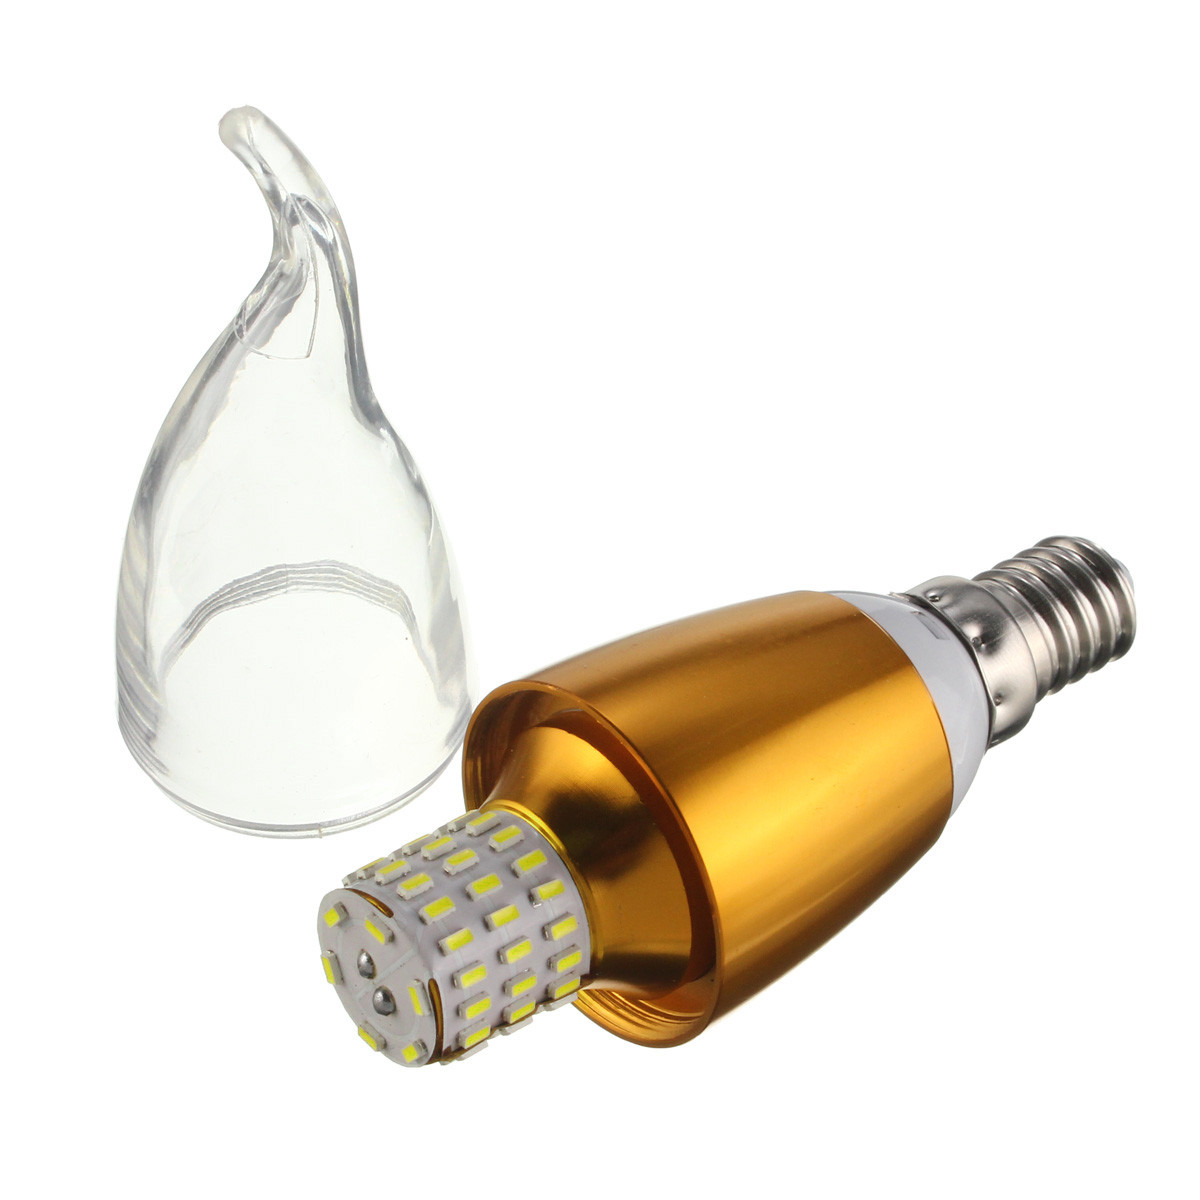 Dimmable-E27-E14-E12-60-SMD-3014-580LM-LED-Candle-Bulb-Golden-Glass-Warm-White-White-Lamp-AC-110V-1041641-7